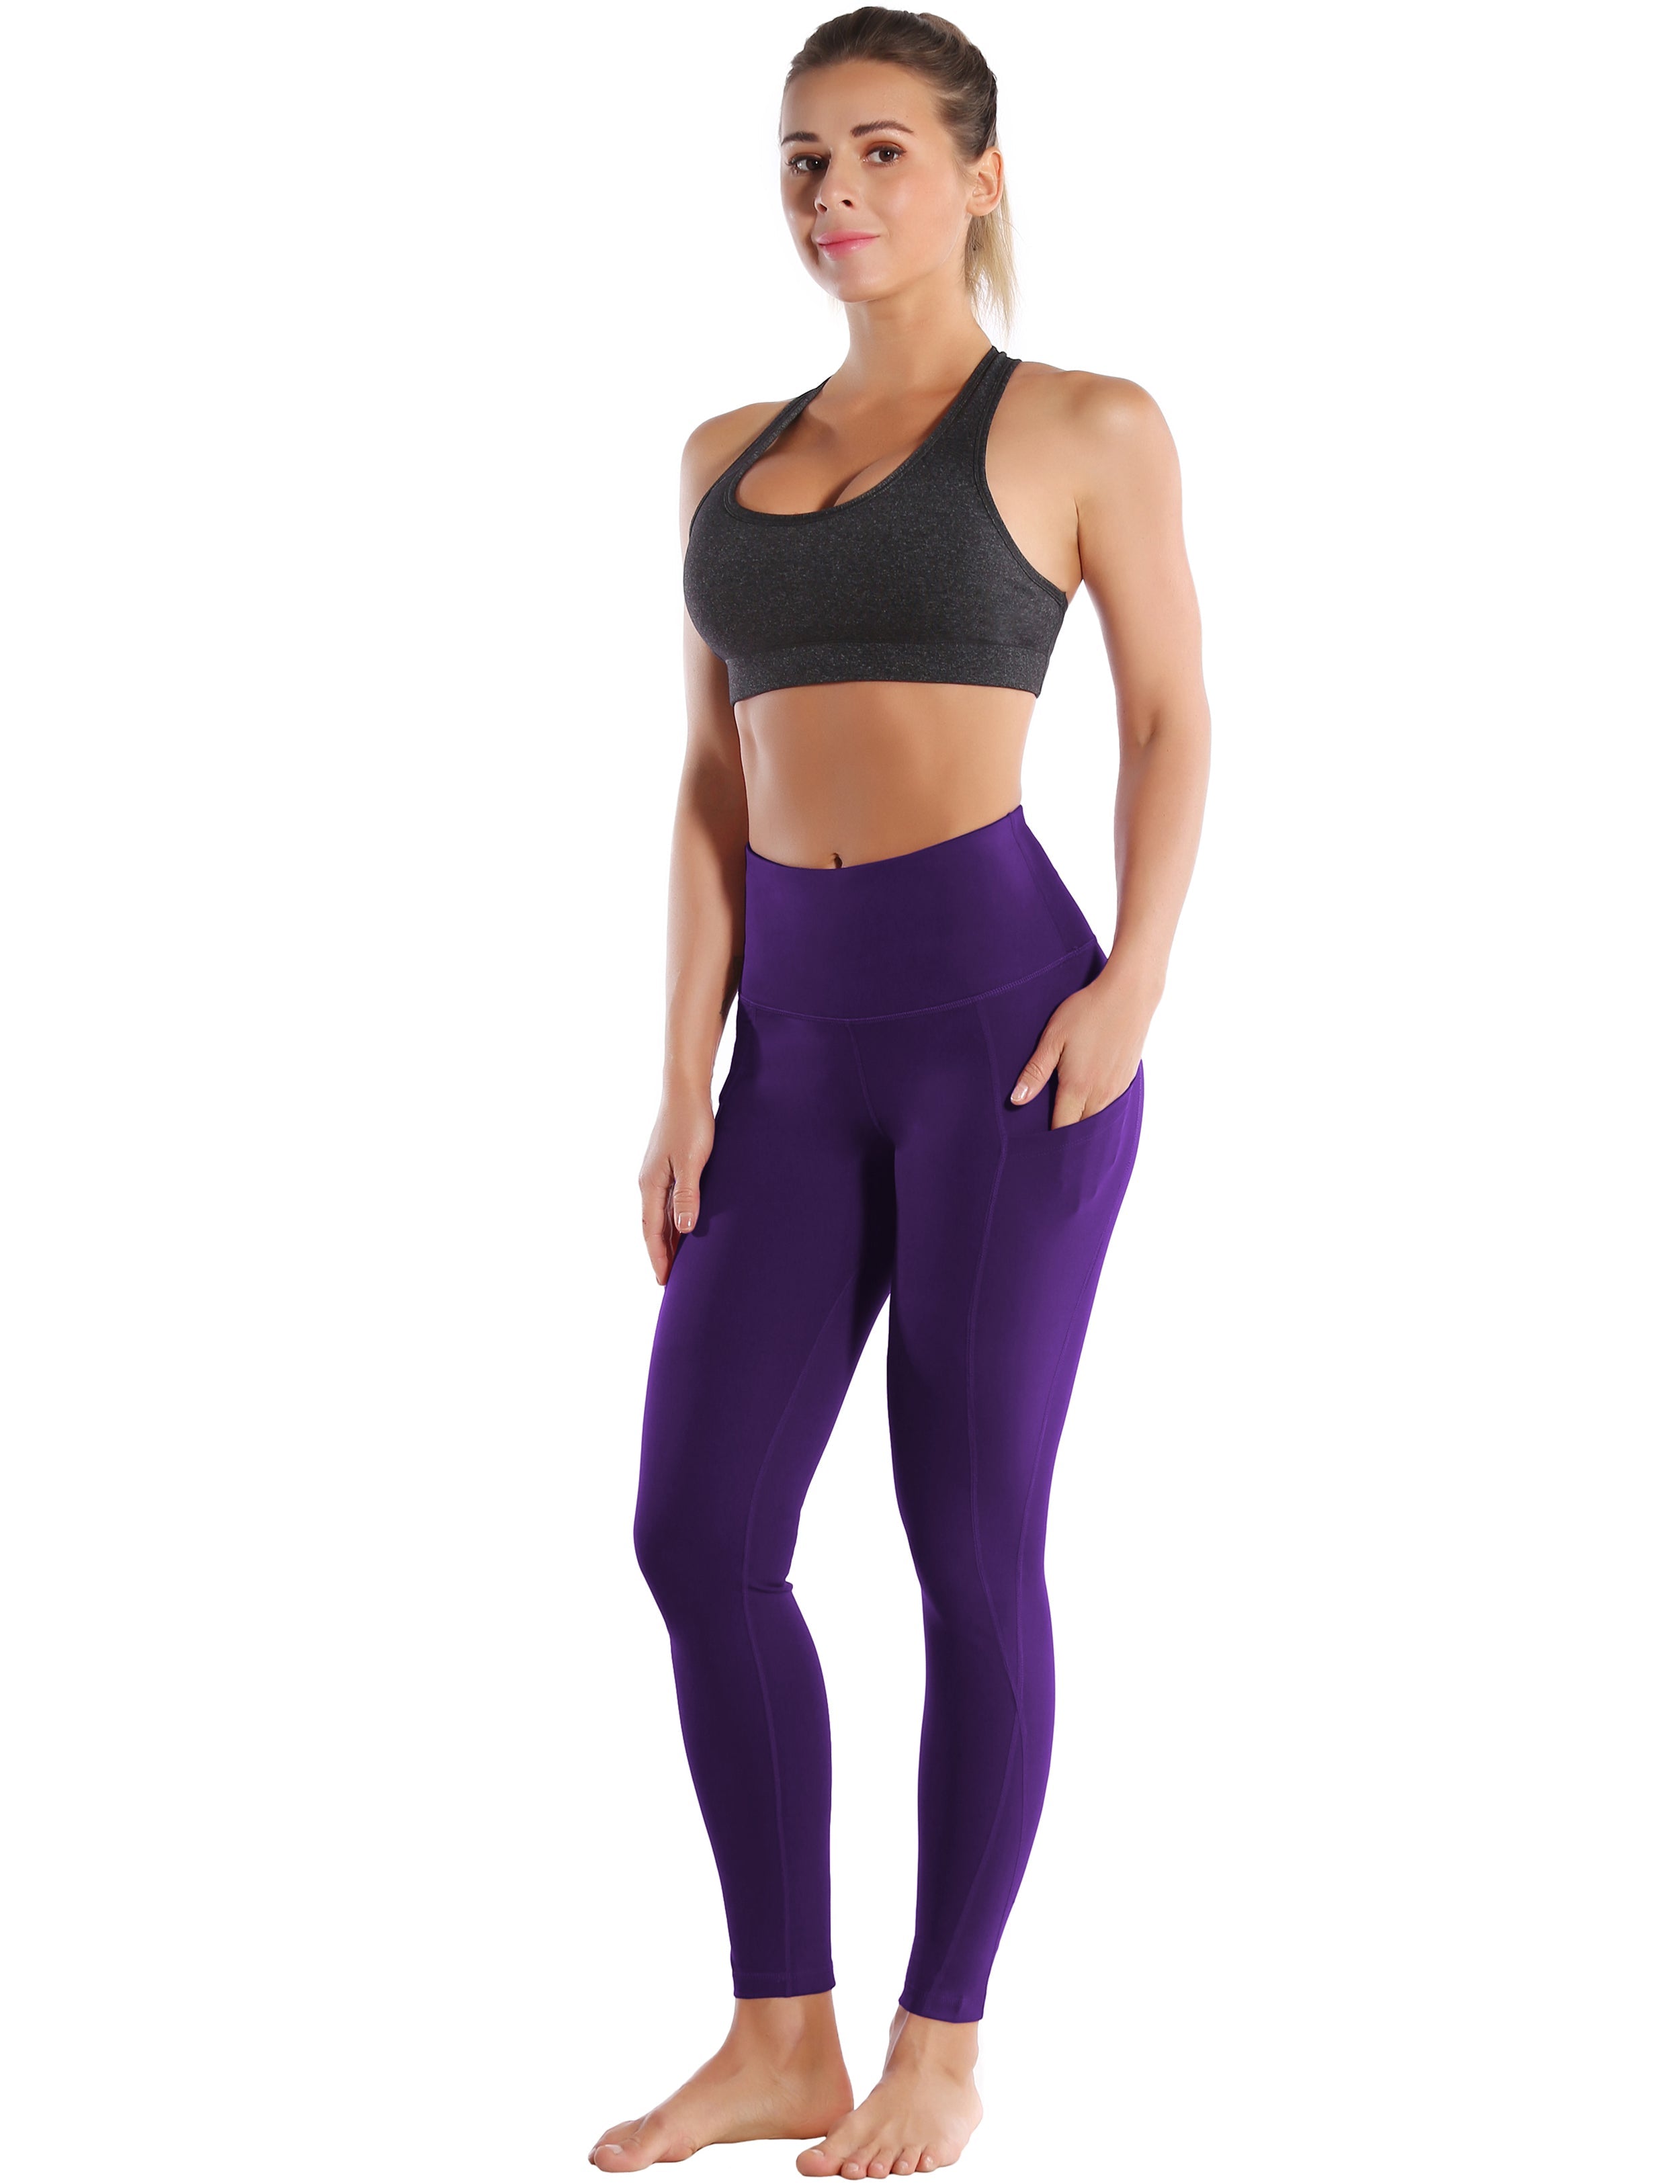 High Waist Side Pockets yogastudio Pants grapevine 75% Nylon, 25% Spandex Fabric doesn't attract lint easily 4-way stretch No see-through Moisture-wicking Tummy control Inner pocket